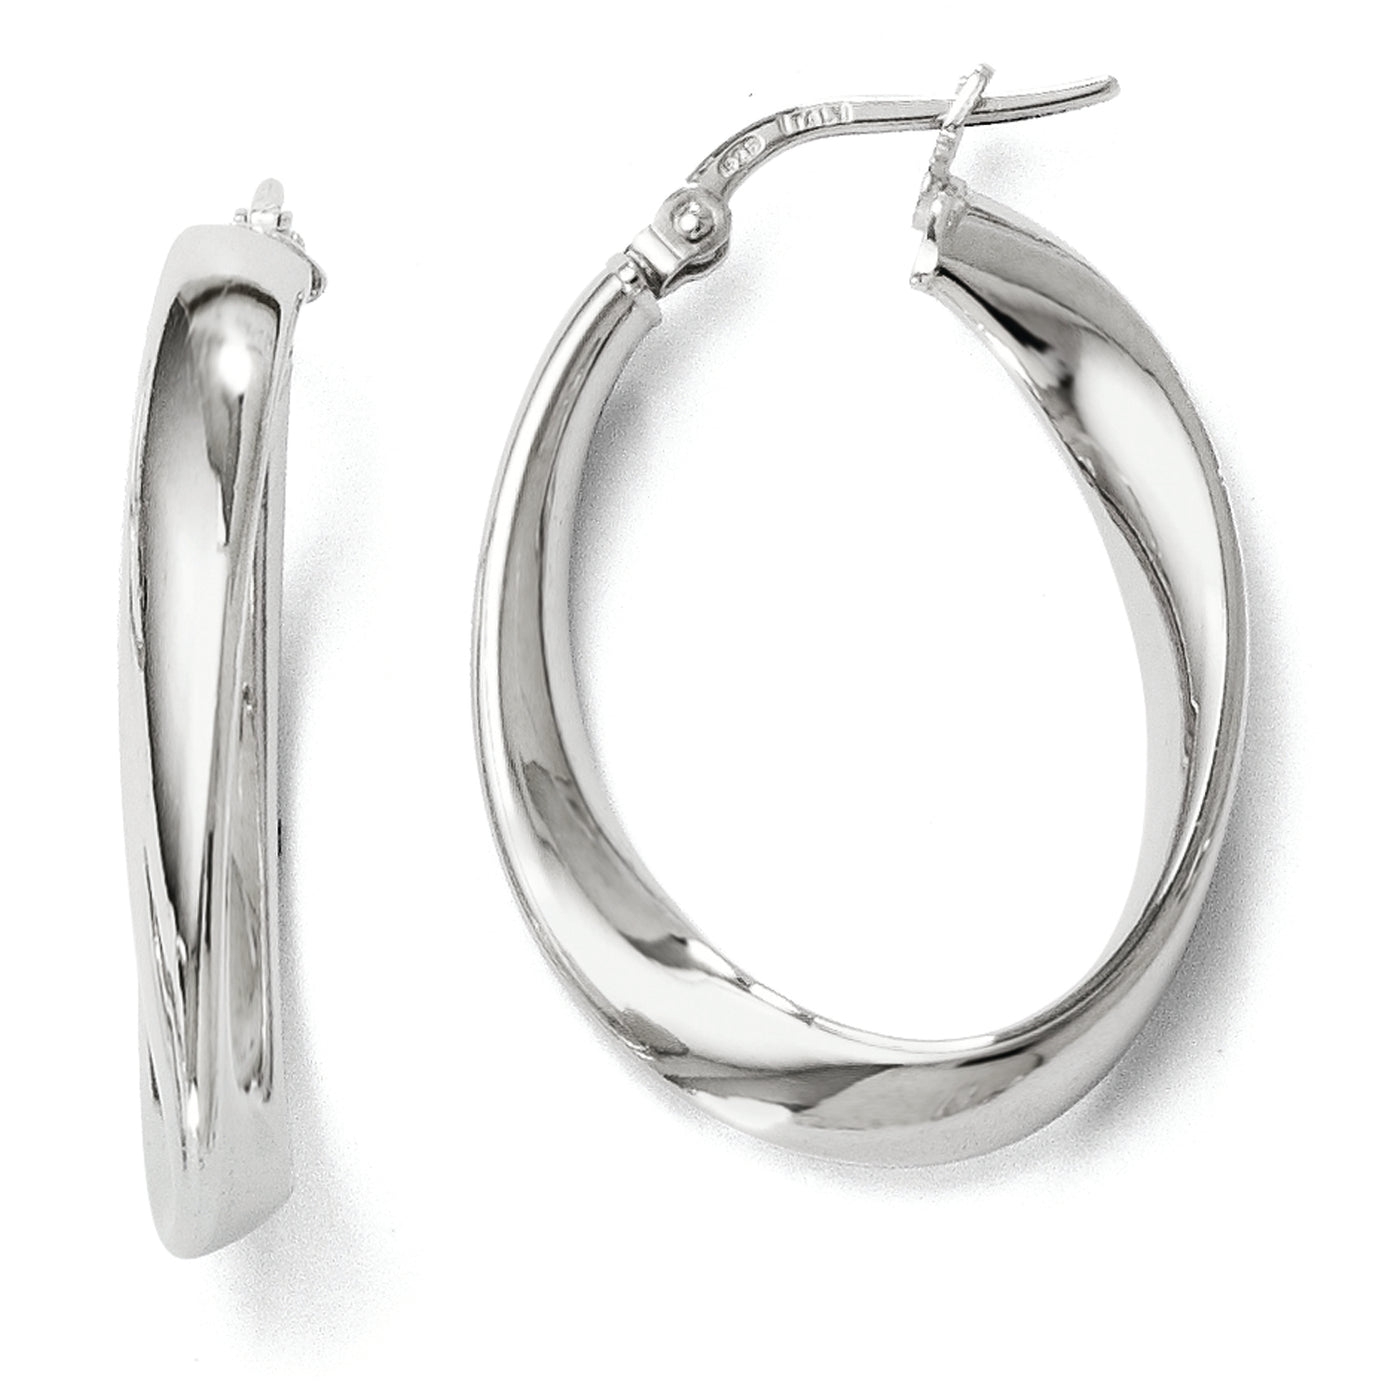 SS RHODIUM PLATED TWISTED HOOPS
QLE253